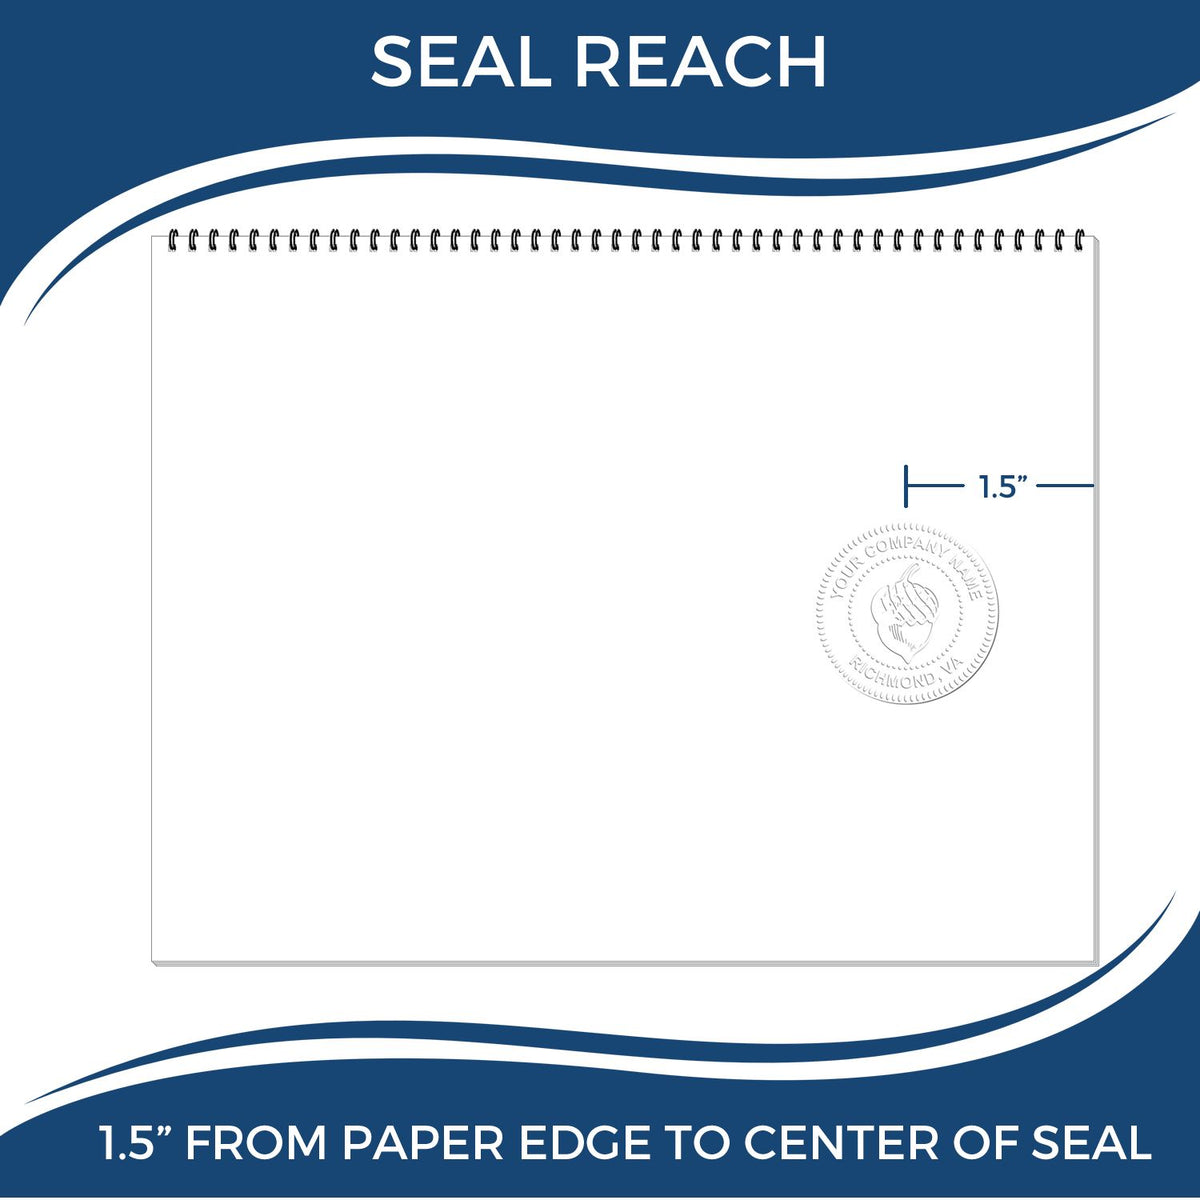 An infographic showing the seal reach which is represented by a ruler and a miniature seal image of the Guam Engineer Desk Seal